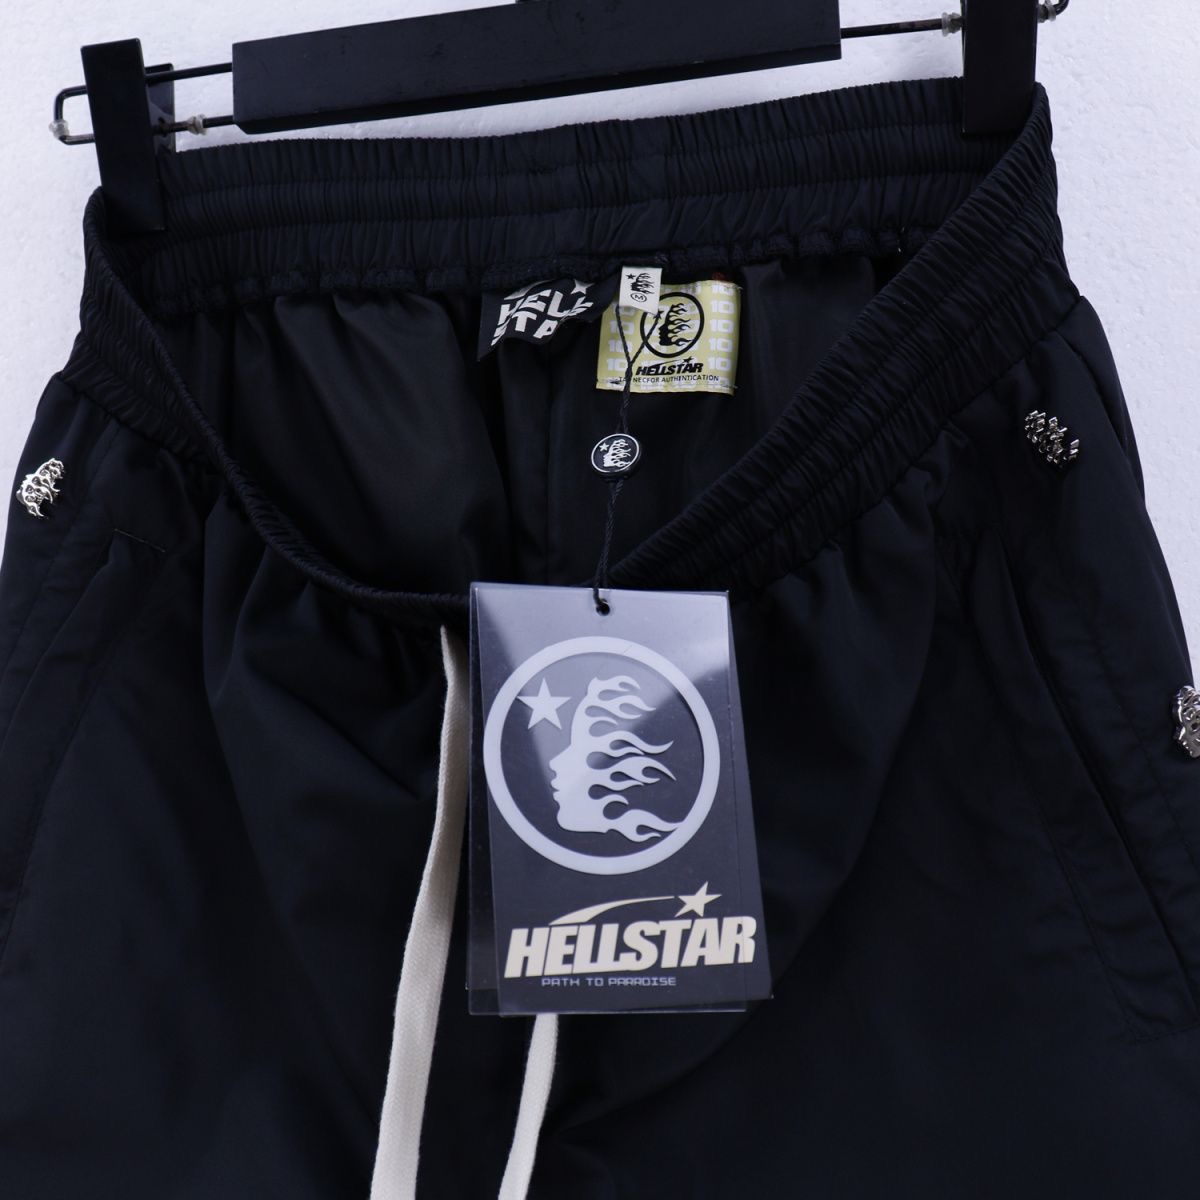 Hellstar Waxed Nylon High Street Wide Foot Casual Pants for Men and Women High Street Wide Ben Sweat-Wicking For Fitness Dancing Sweatpants Running Track Pants SMLXL